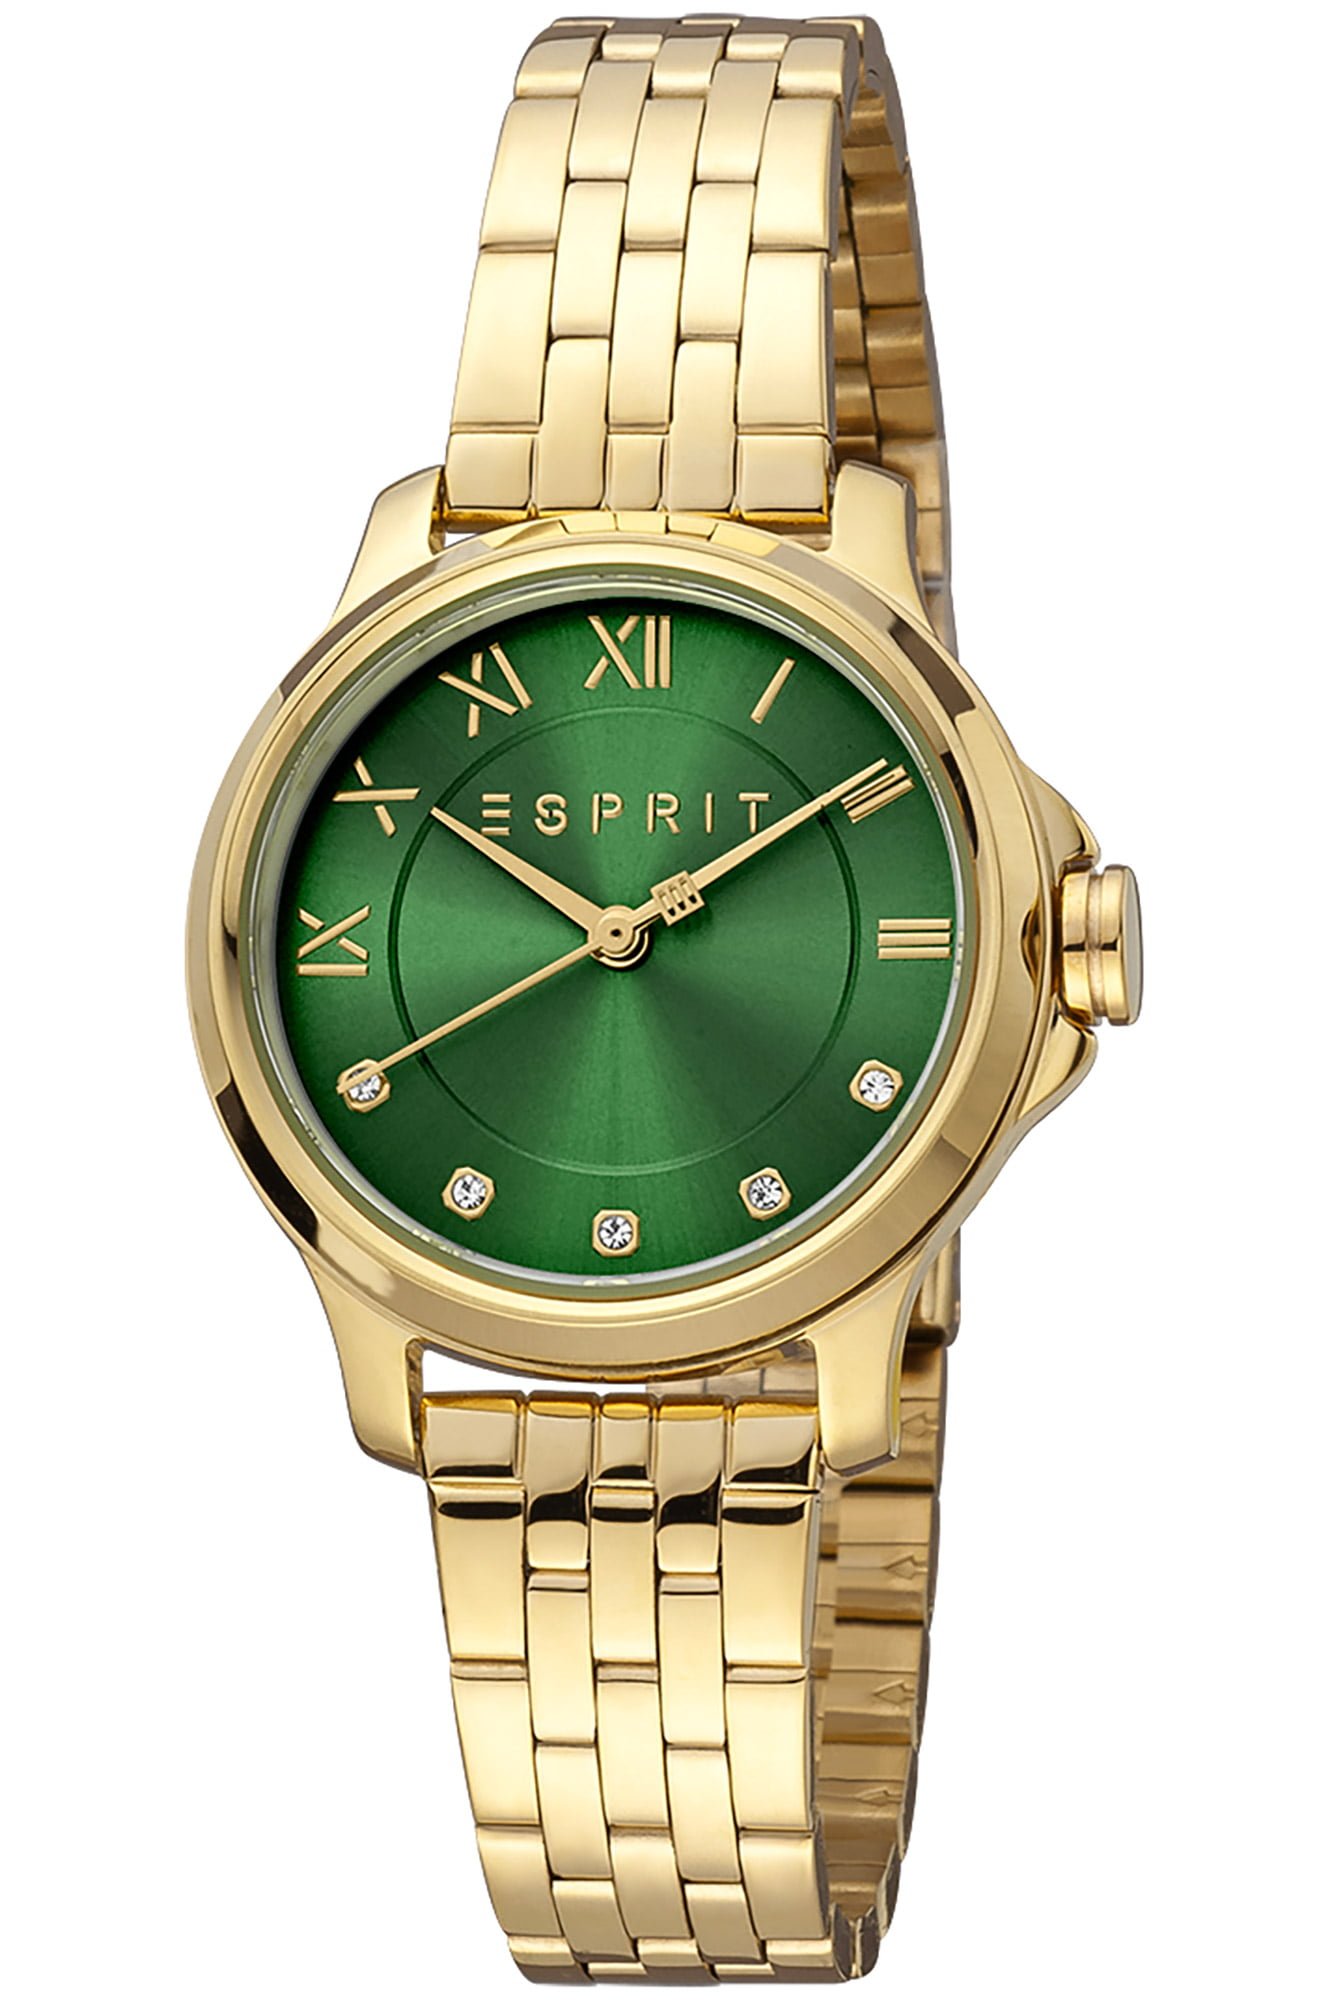 Buy ESPRIT Analog Watch for Women-ES1L230M0065 at Amazon.in